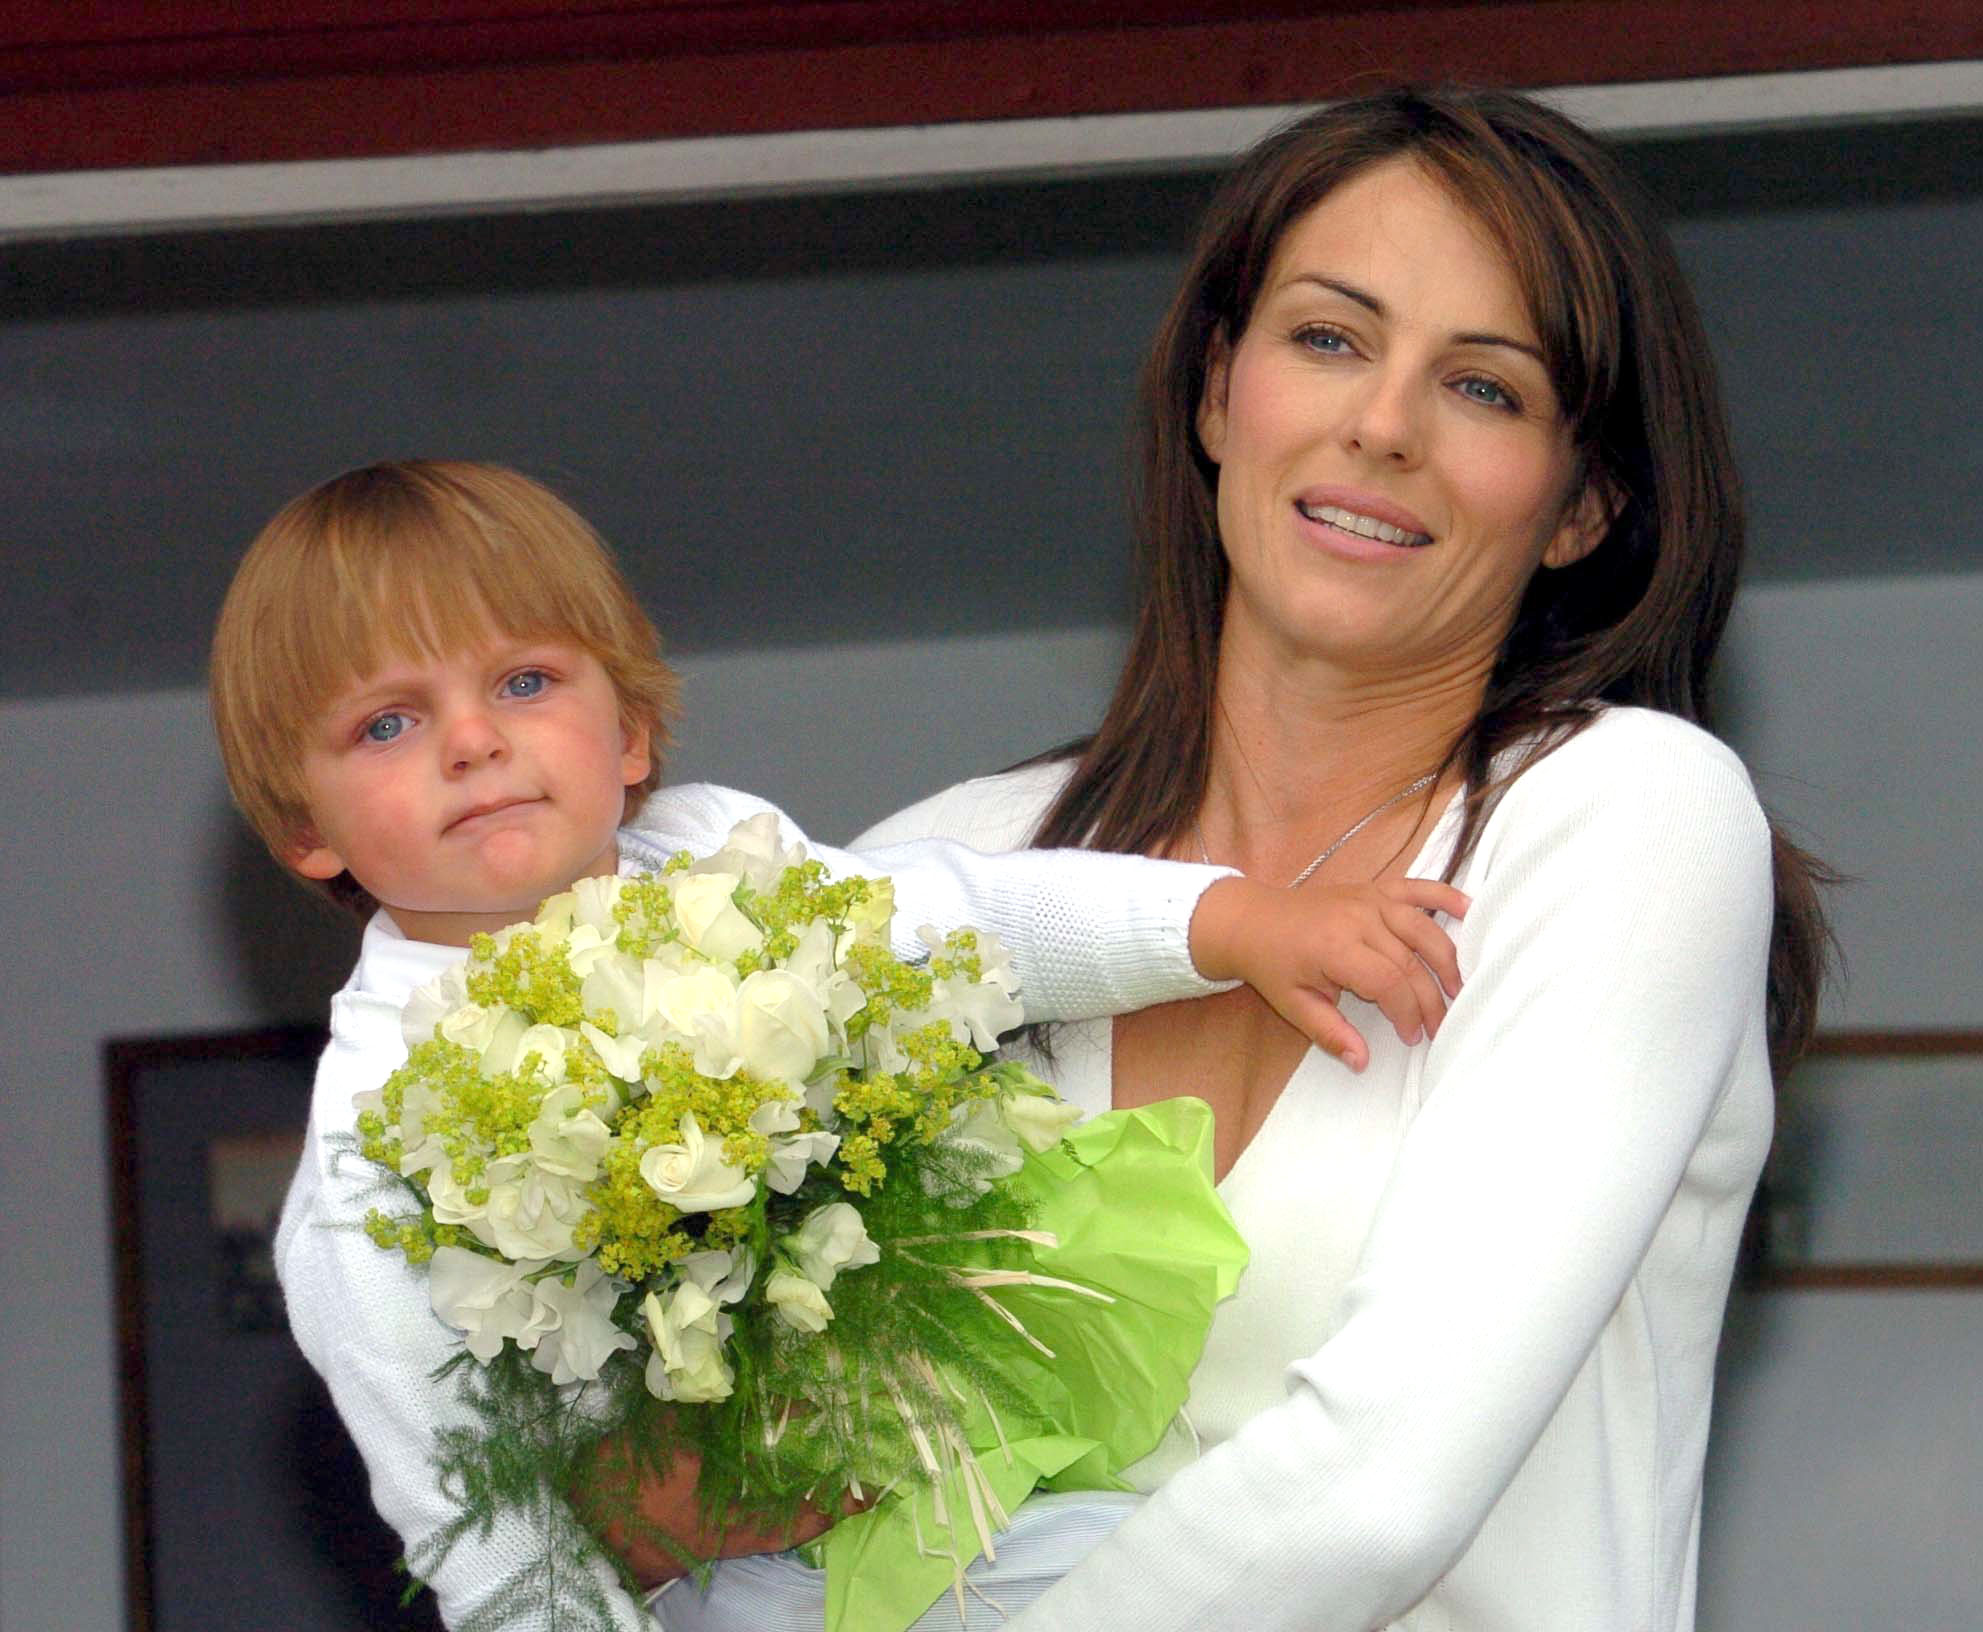 <p>Single mom Elizabeth Hurley held her then-14-month-old son, Damian Hurley -- whose dad is screenwriter-producer and philanthropist Steve Bing, who died in 2020 -- during the Ampney Crucis Village Fete in England's Cotswold District on June 26, 2004. Keep reading to see gorgeous Damian at 19...</p>